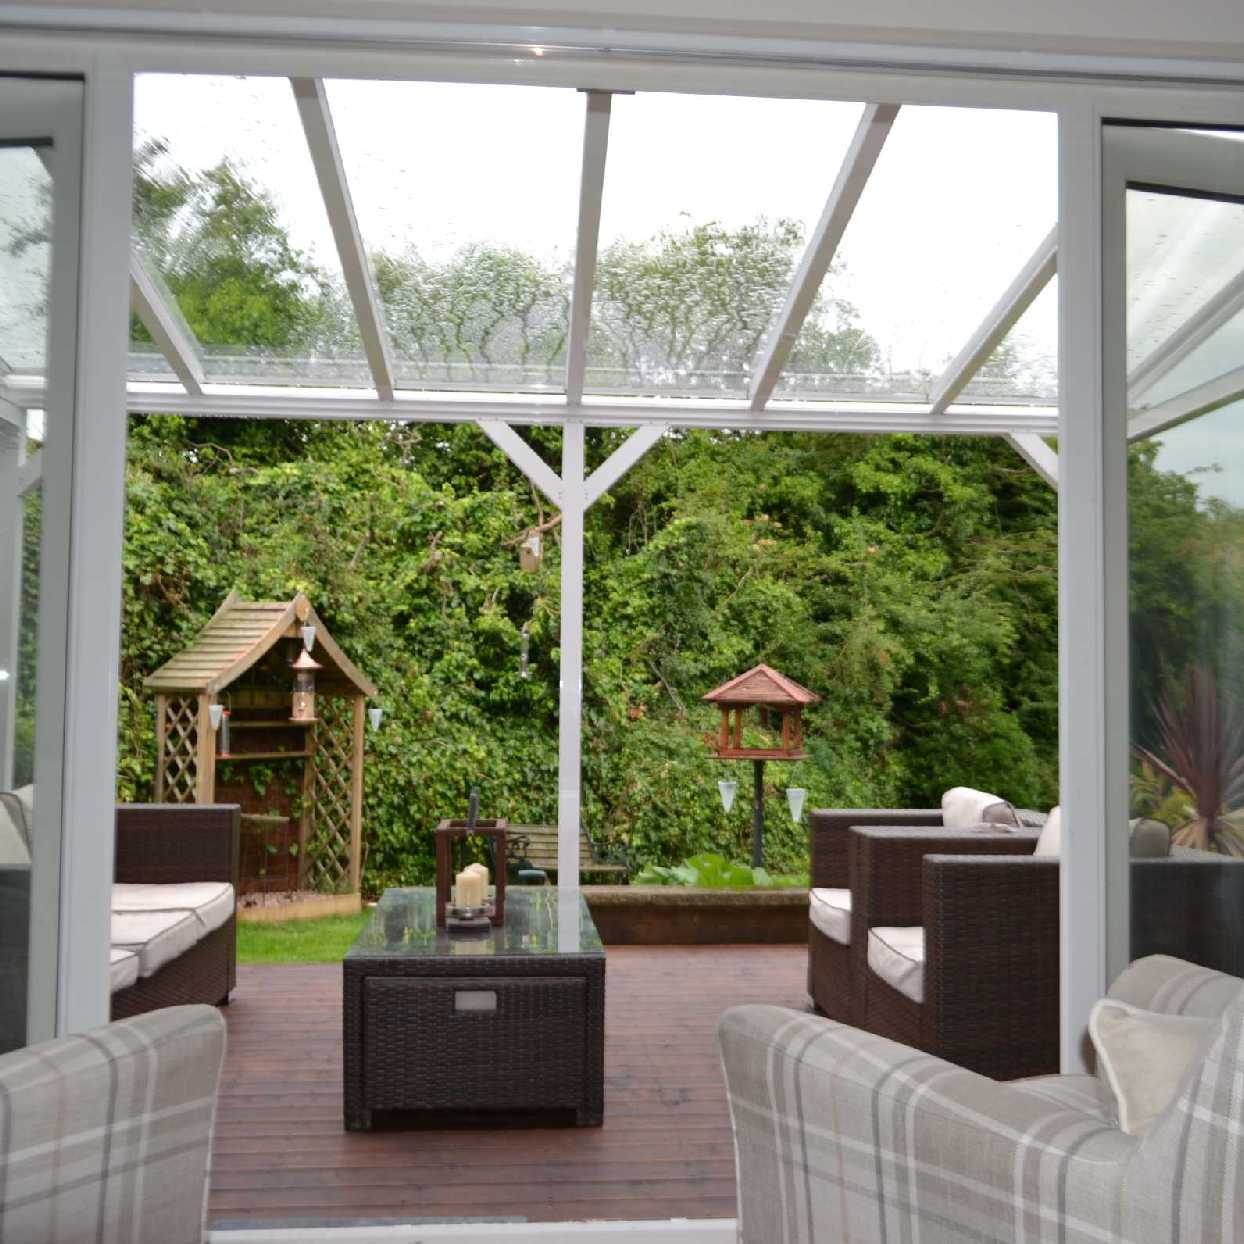 Great selection of Omega Smart Lean-To Canopy, White UNGLAZED for 6mm Glazing - 5.6m (W) x 1.5m (P), (3) Supporting Posts